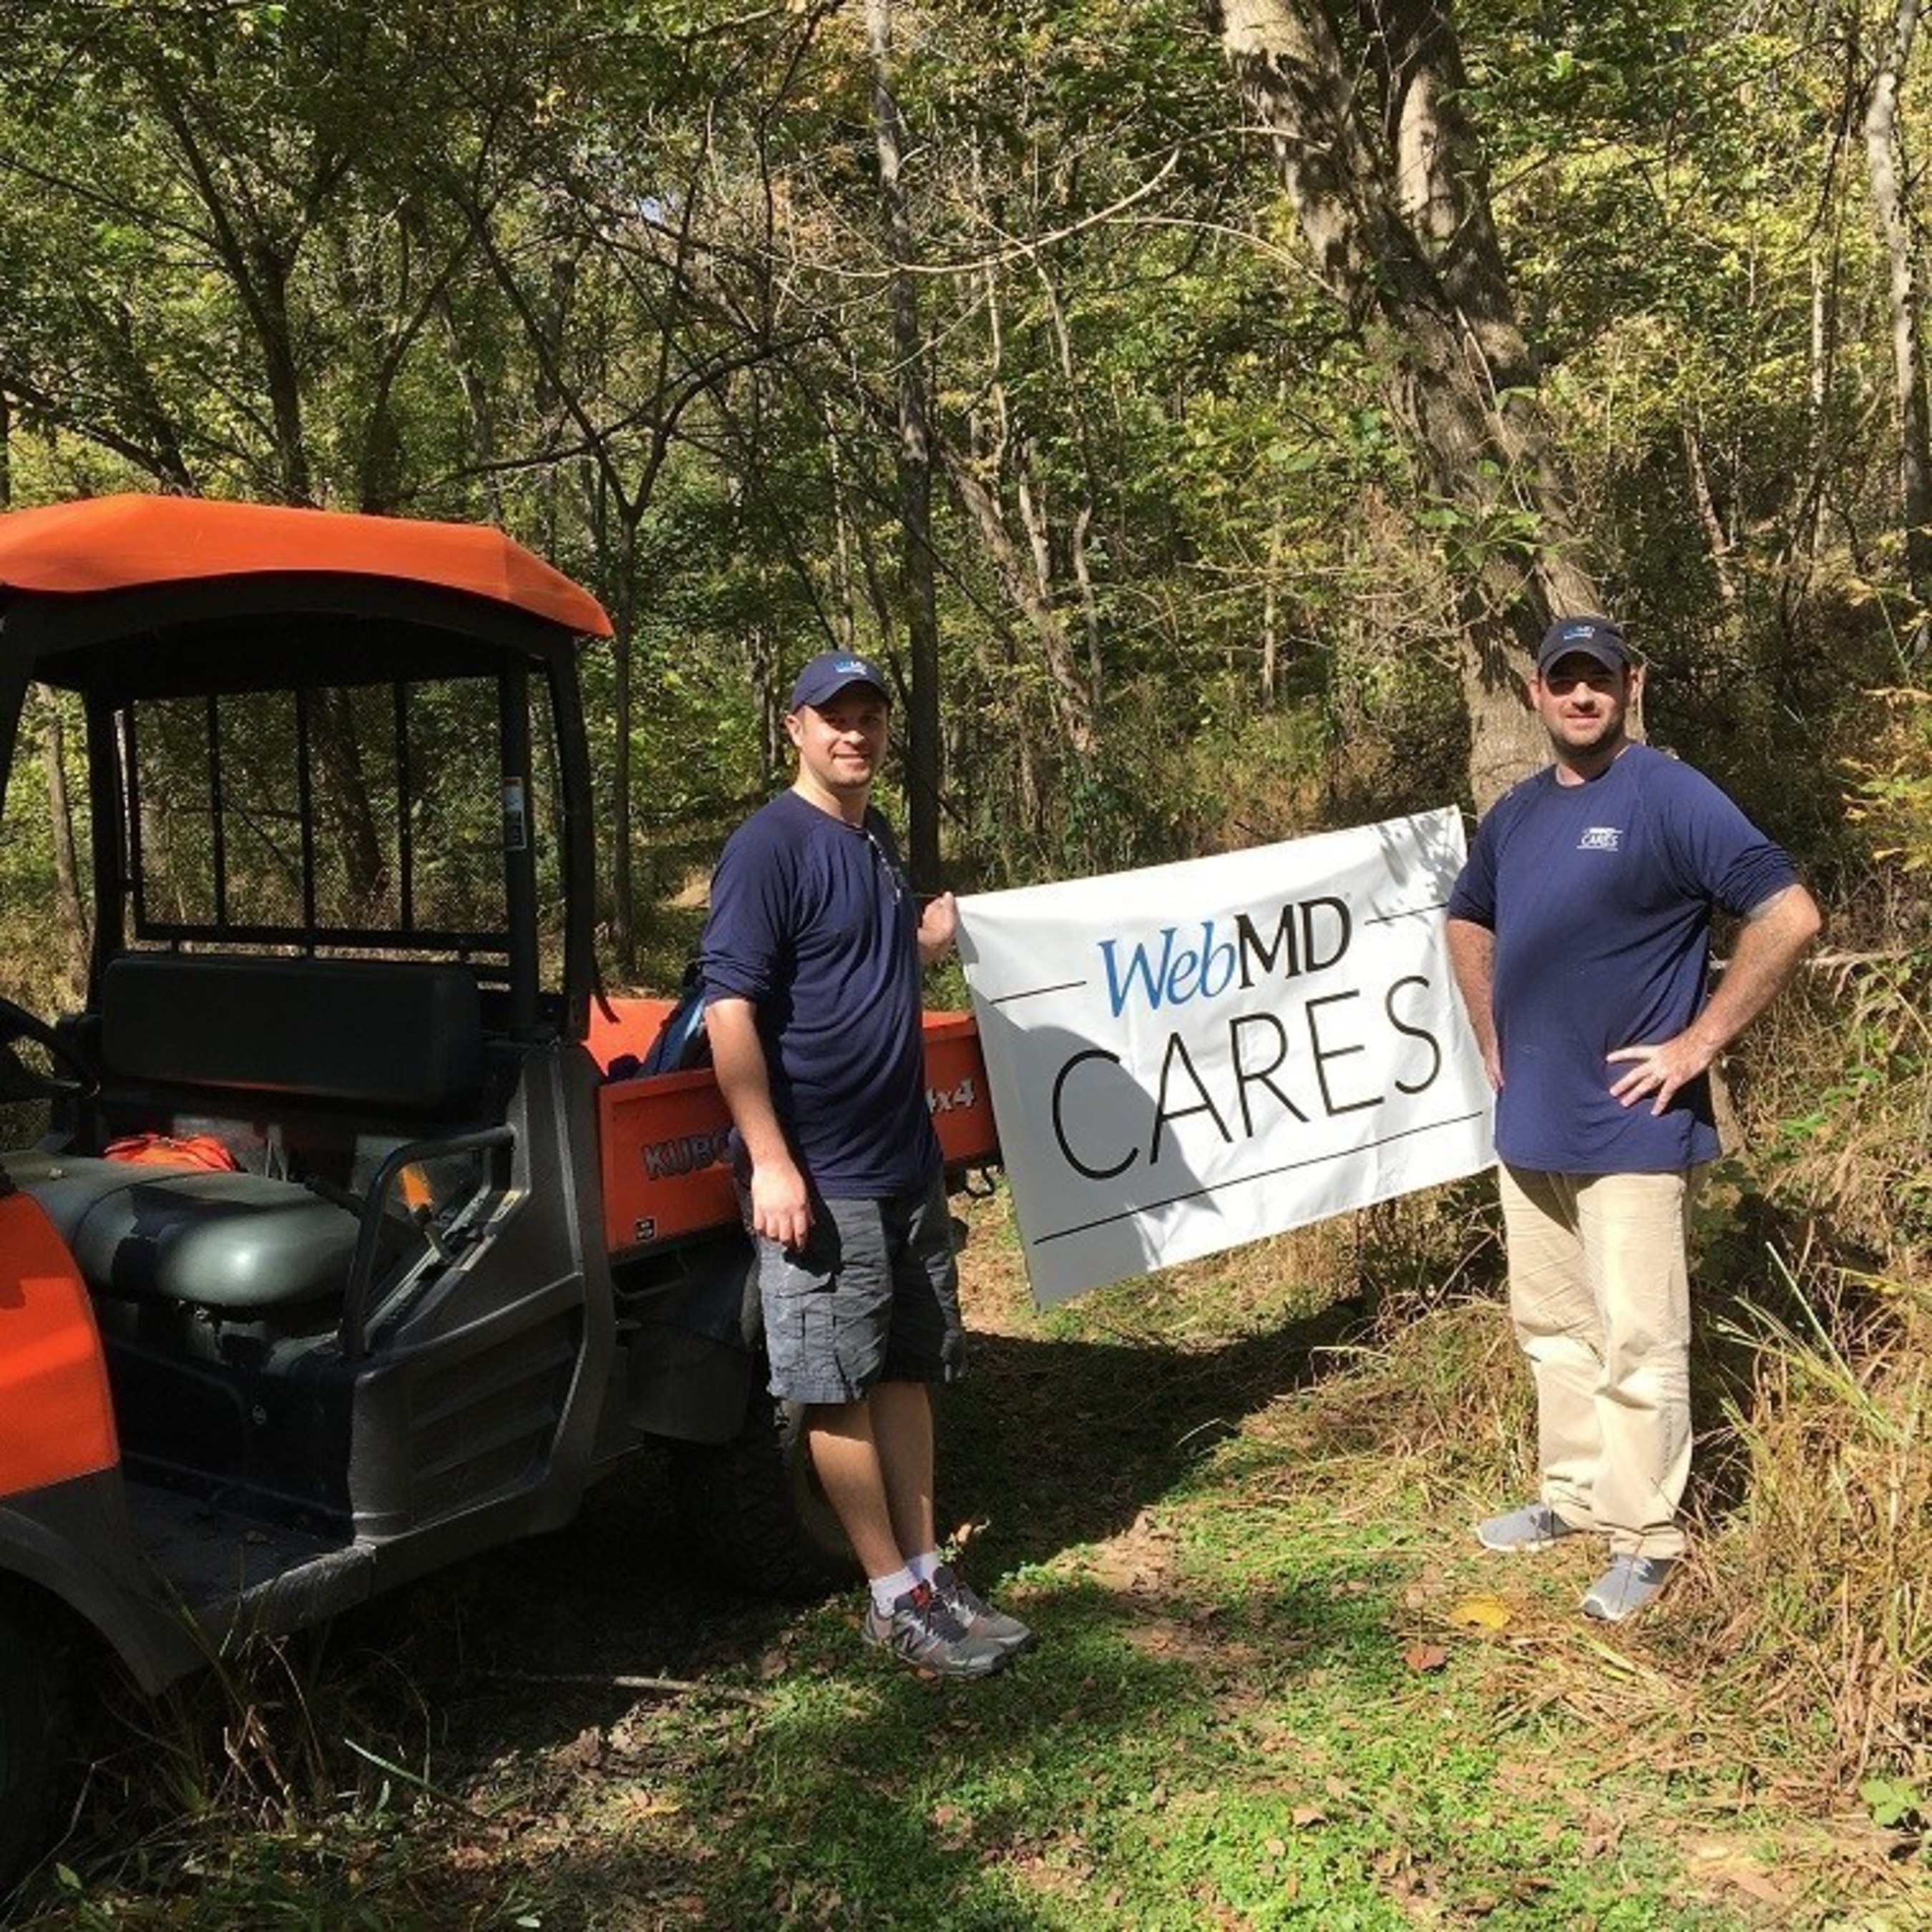 WebMD Cares Impact Day 2016 - Paul Mort and Damian Busicchia, Ashburn, VA-based employees, spent the day at the Banshee Reeks Nature Preserve.